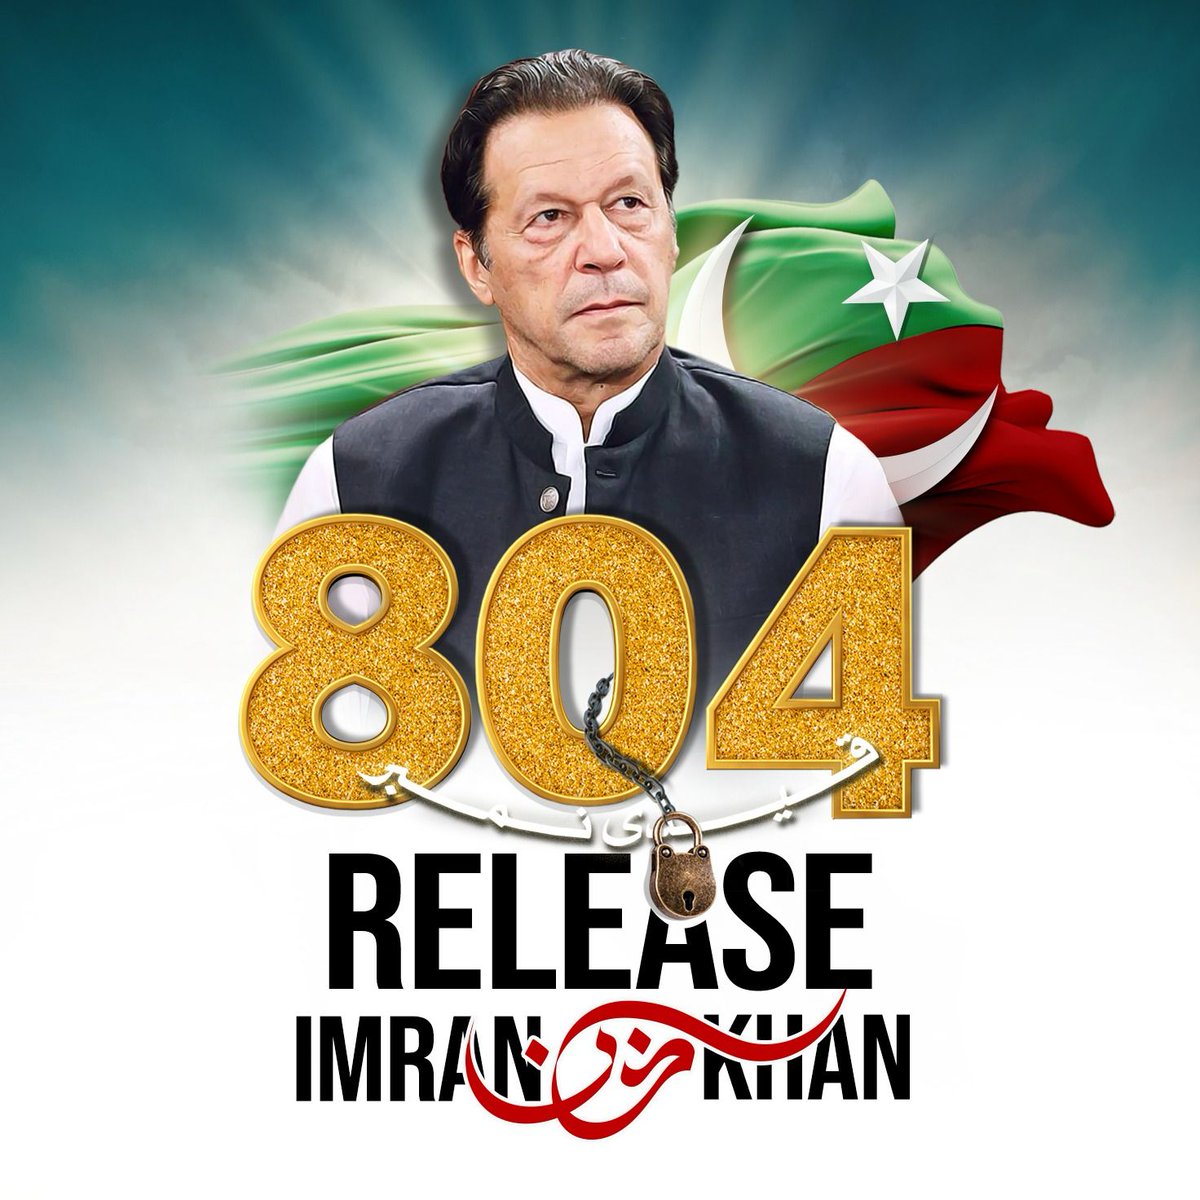 250 days have been passed since the illegal incarceration of the most popular and revered leader of the nation. All politically motivated ISI-made cases against him are dying their own death. #ReleaseImranKhan for the restoration of economic & political stability